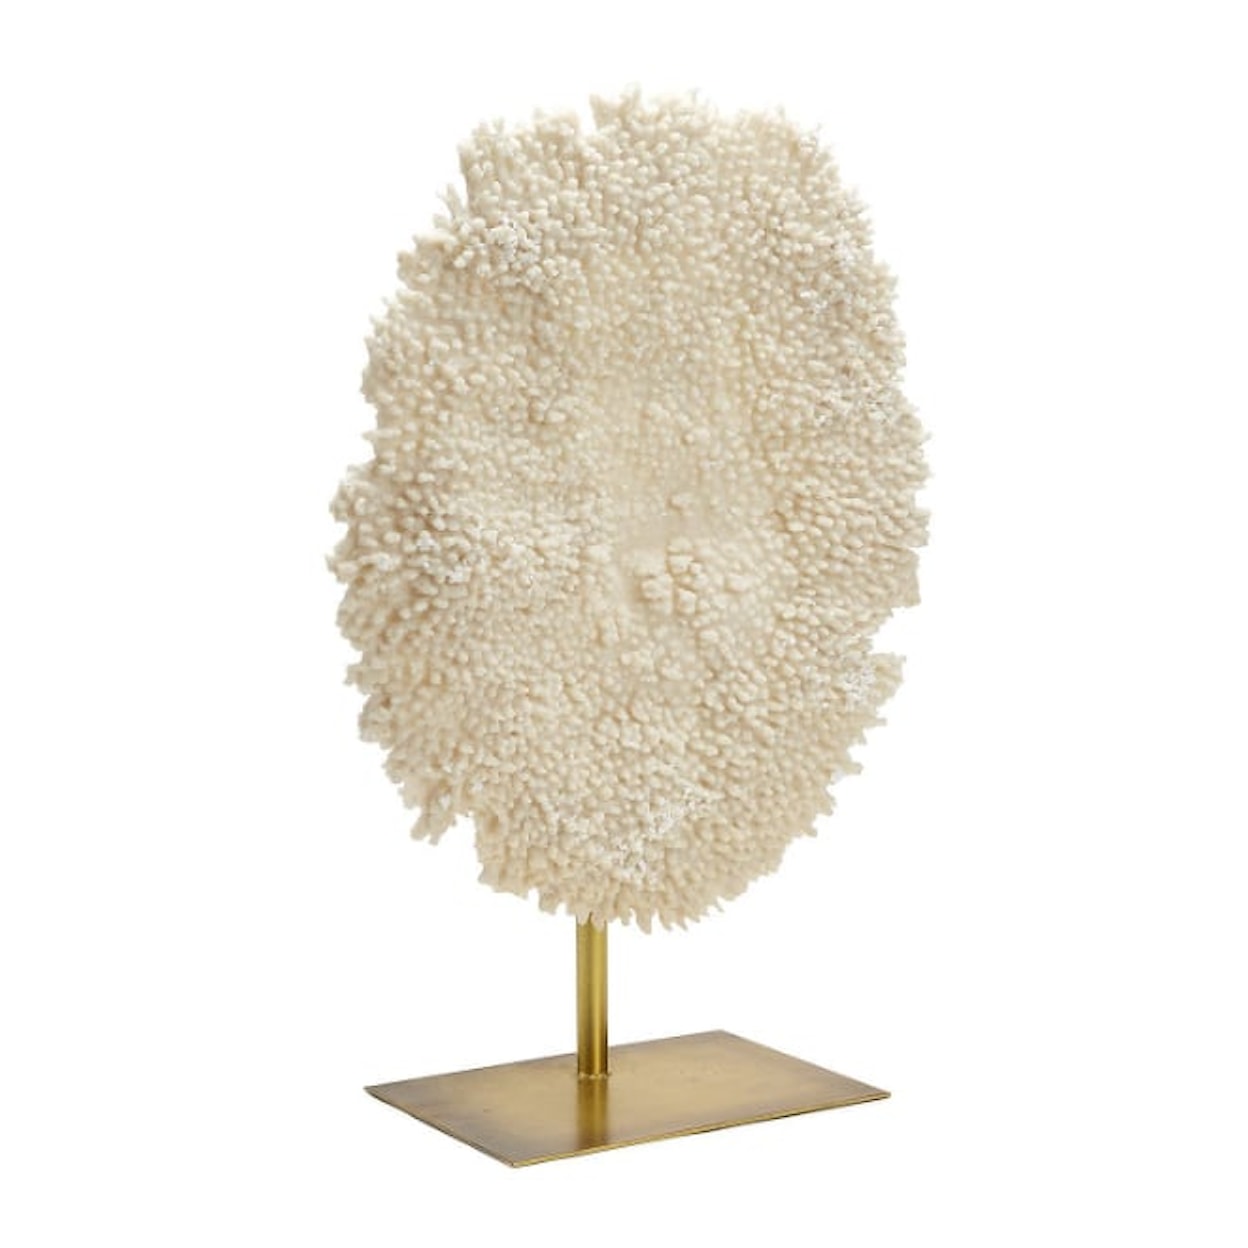 Two's Company Coastal Chic 26 1/2" White Poly Coral Sculpture on Stand